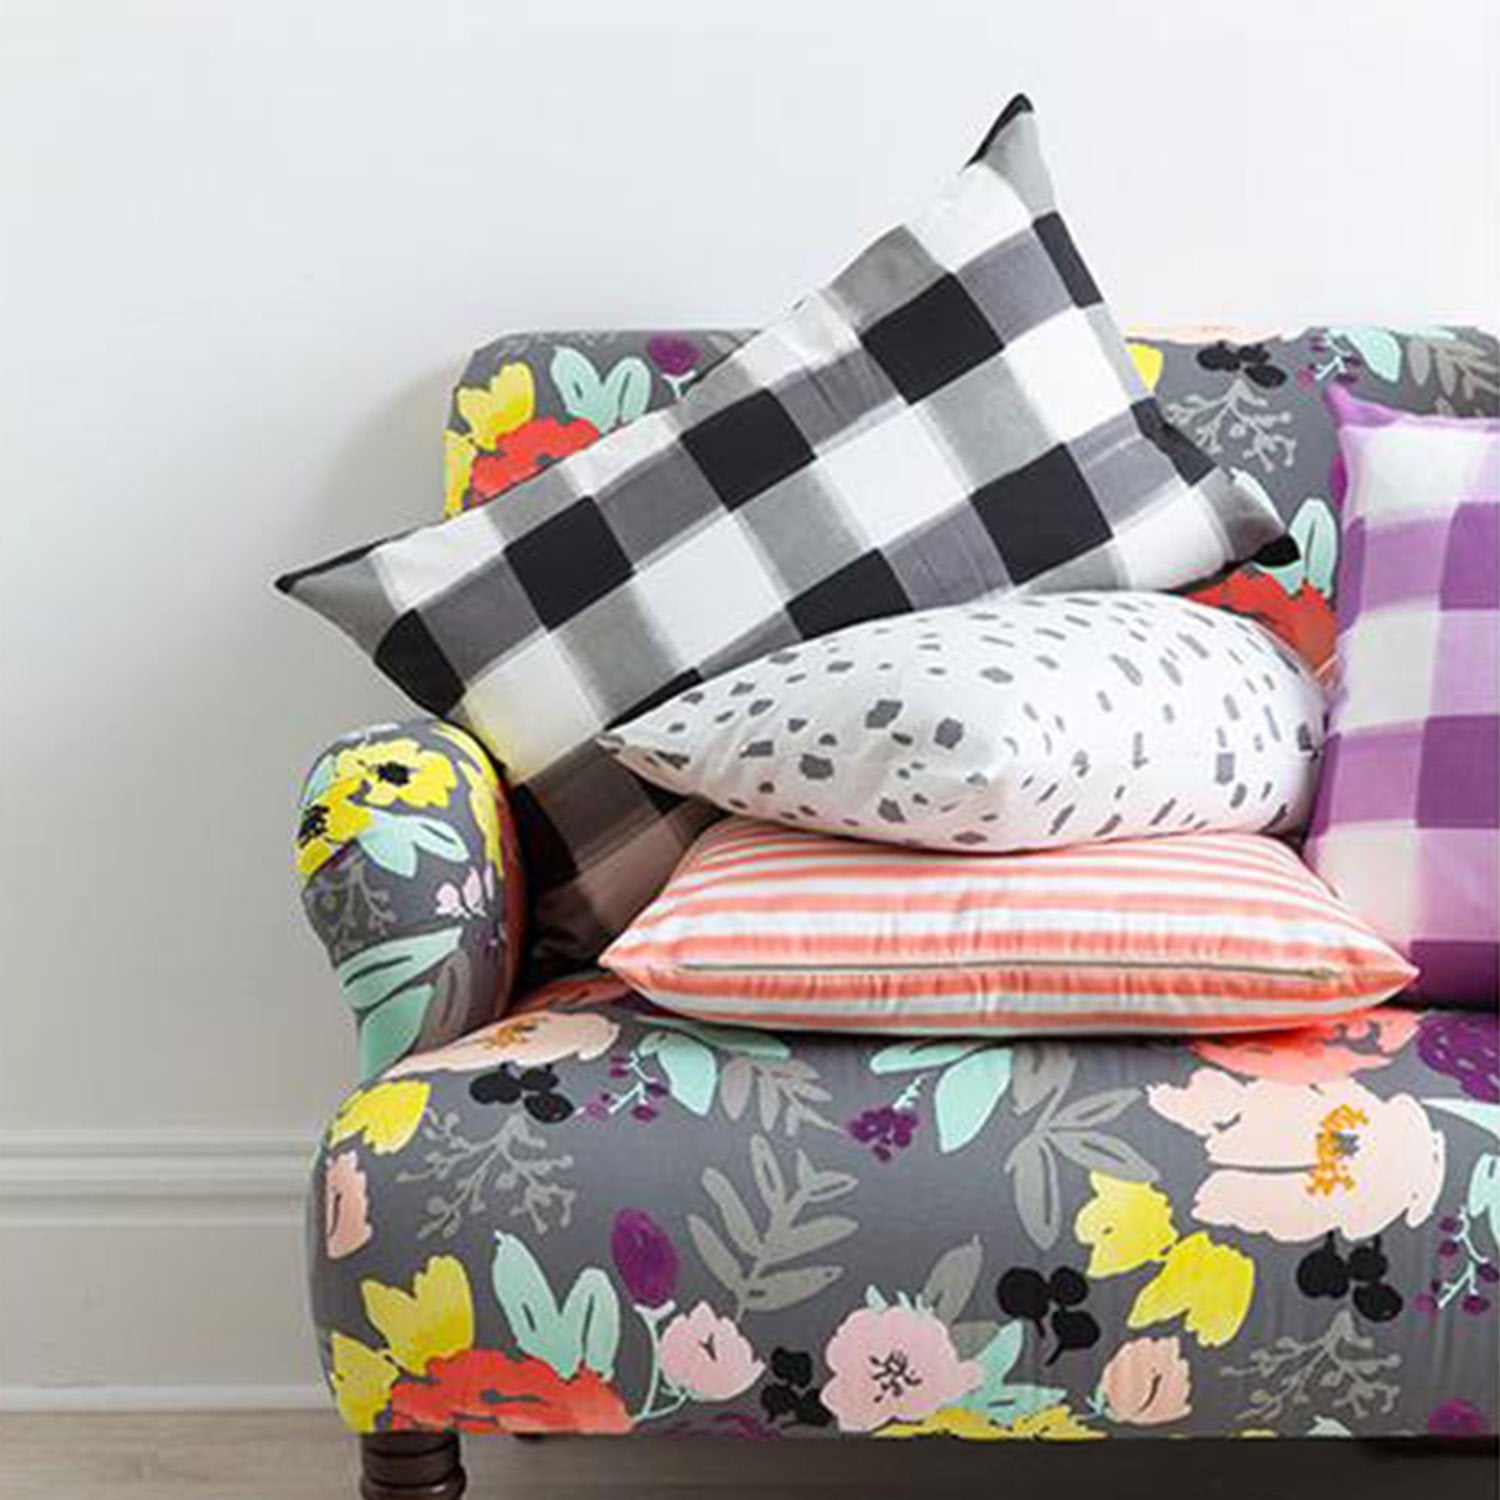 Burnside Buffalo Checked Pillows on Floral Couch